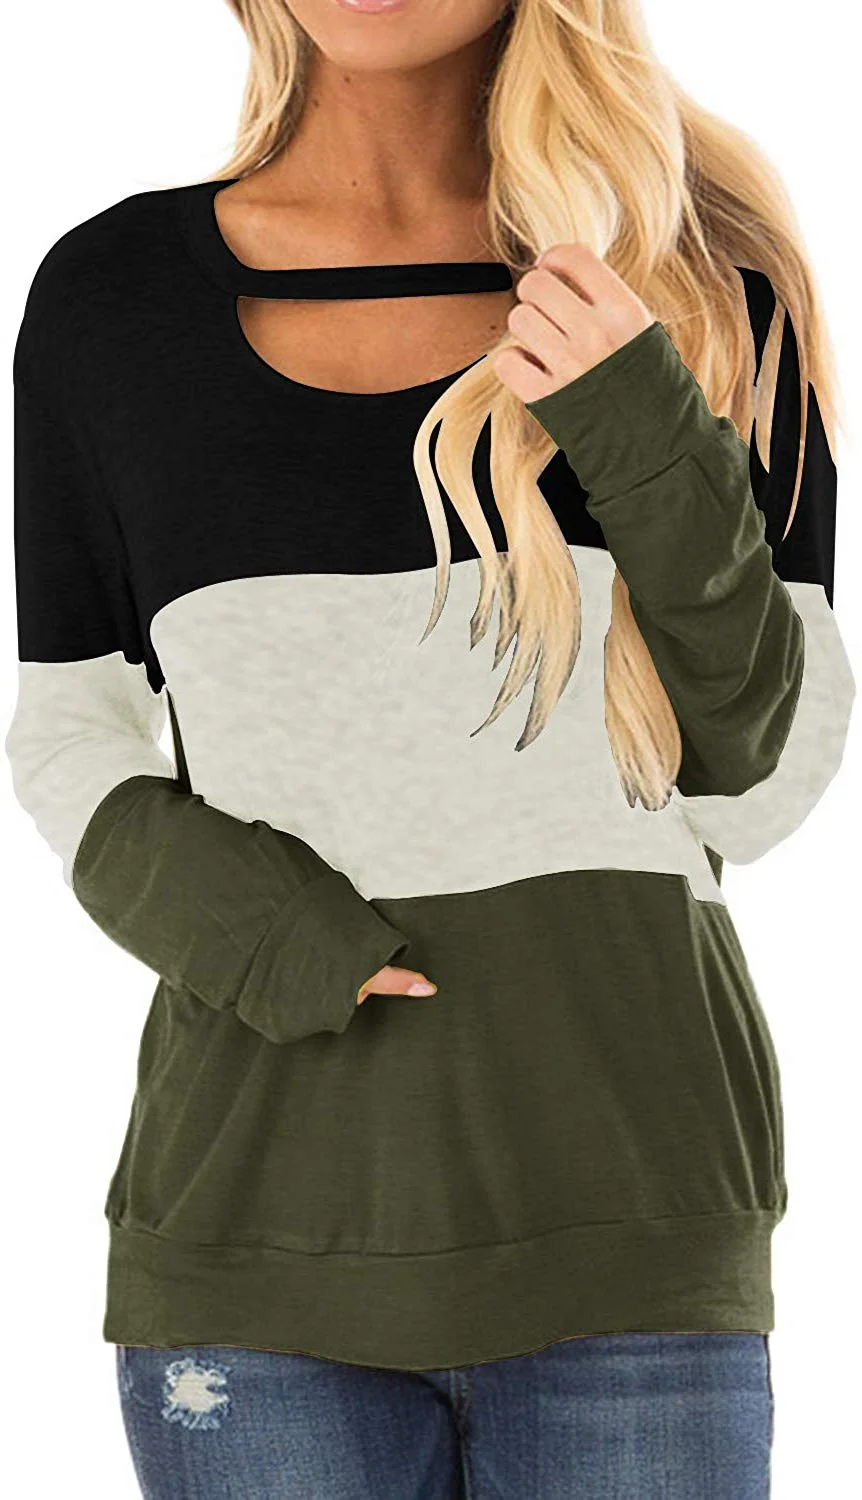 Women's Color Block Chest Cutout Tunics Long Sleeve Shirts Scoop Neck Blouse Casual Loose Tops